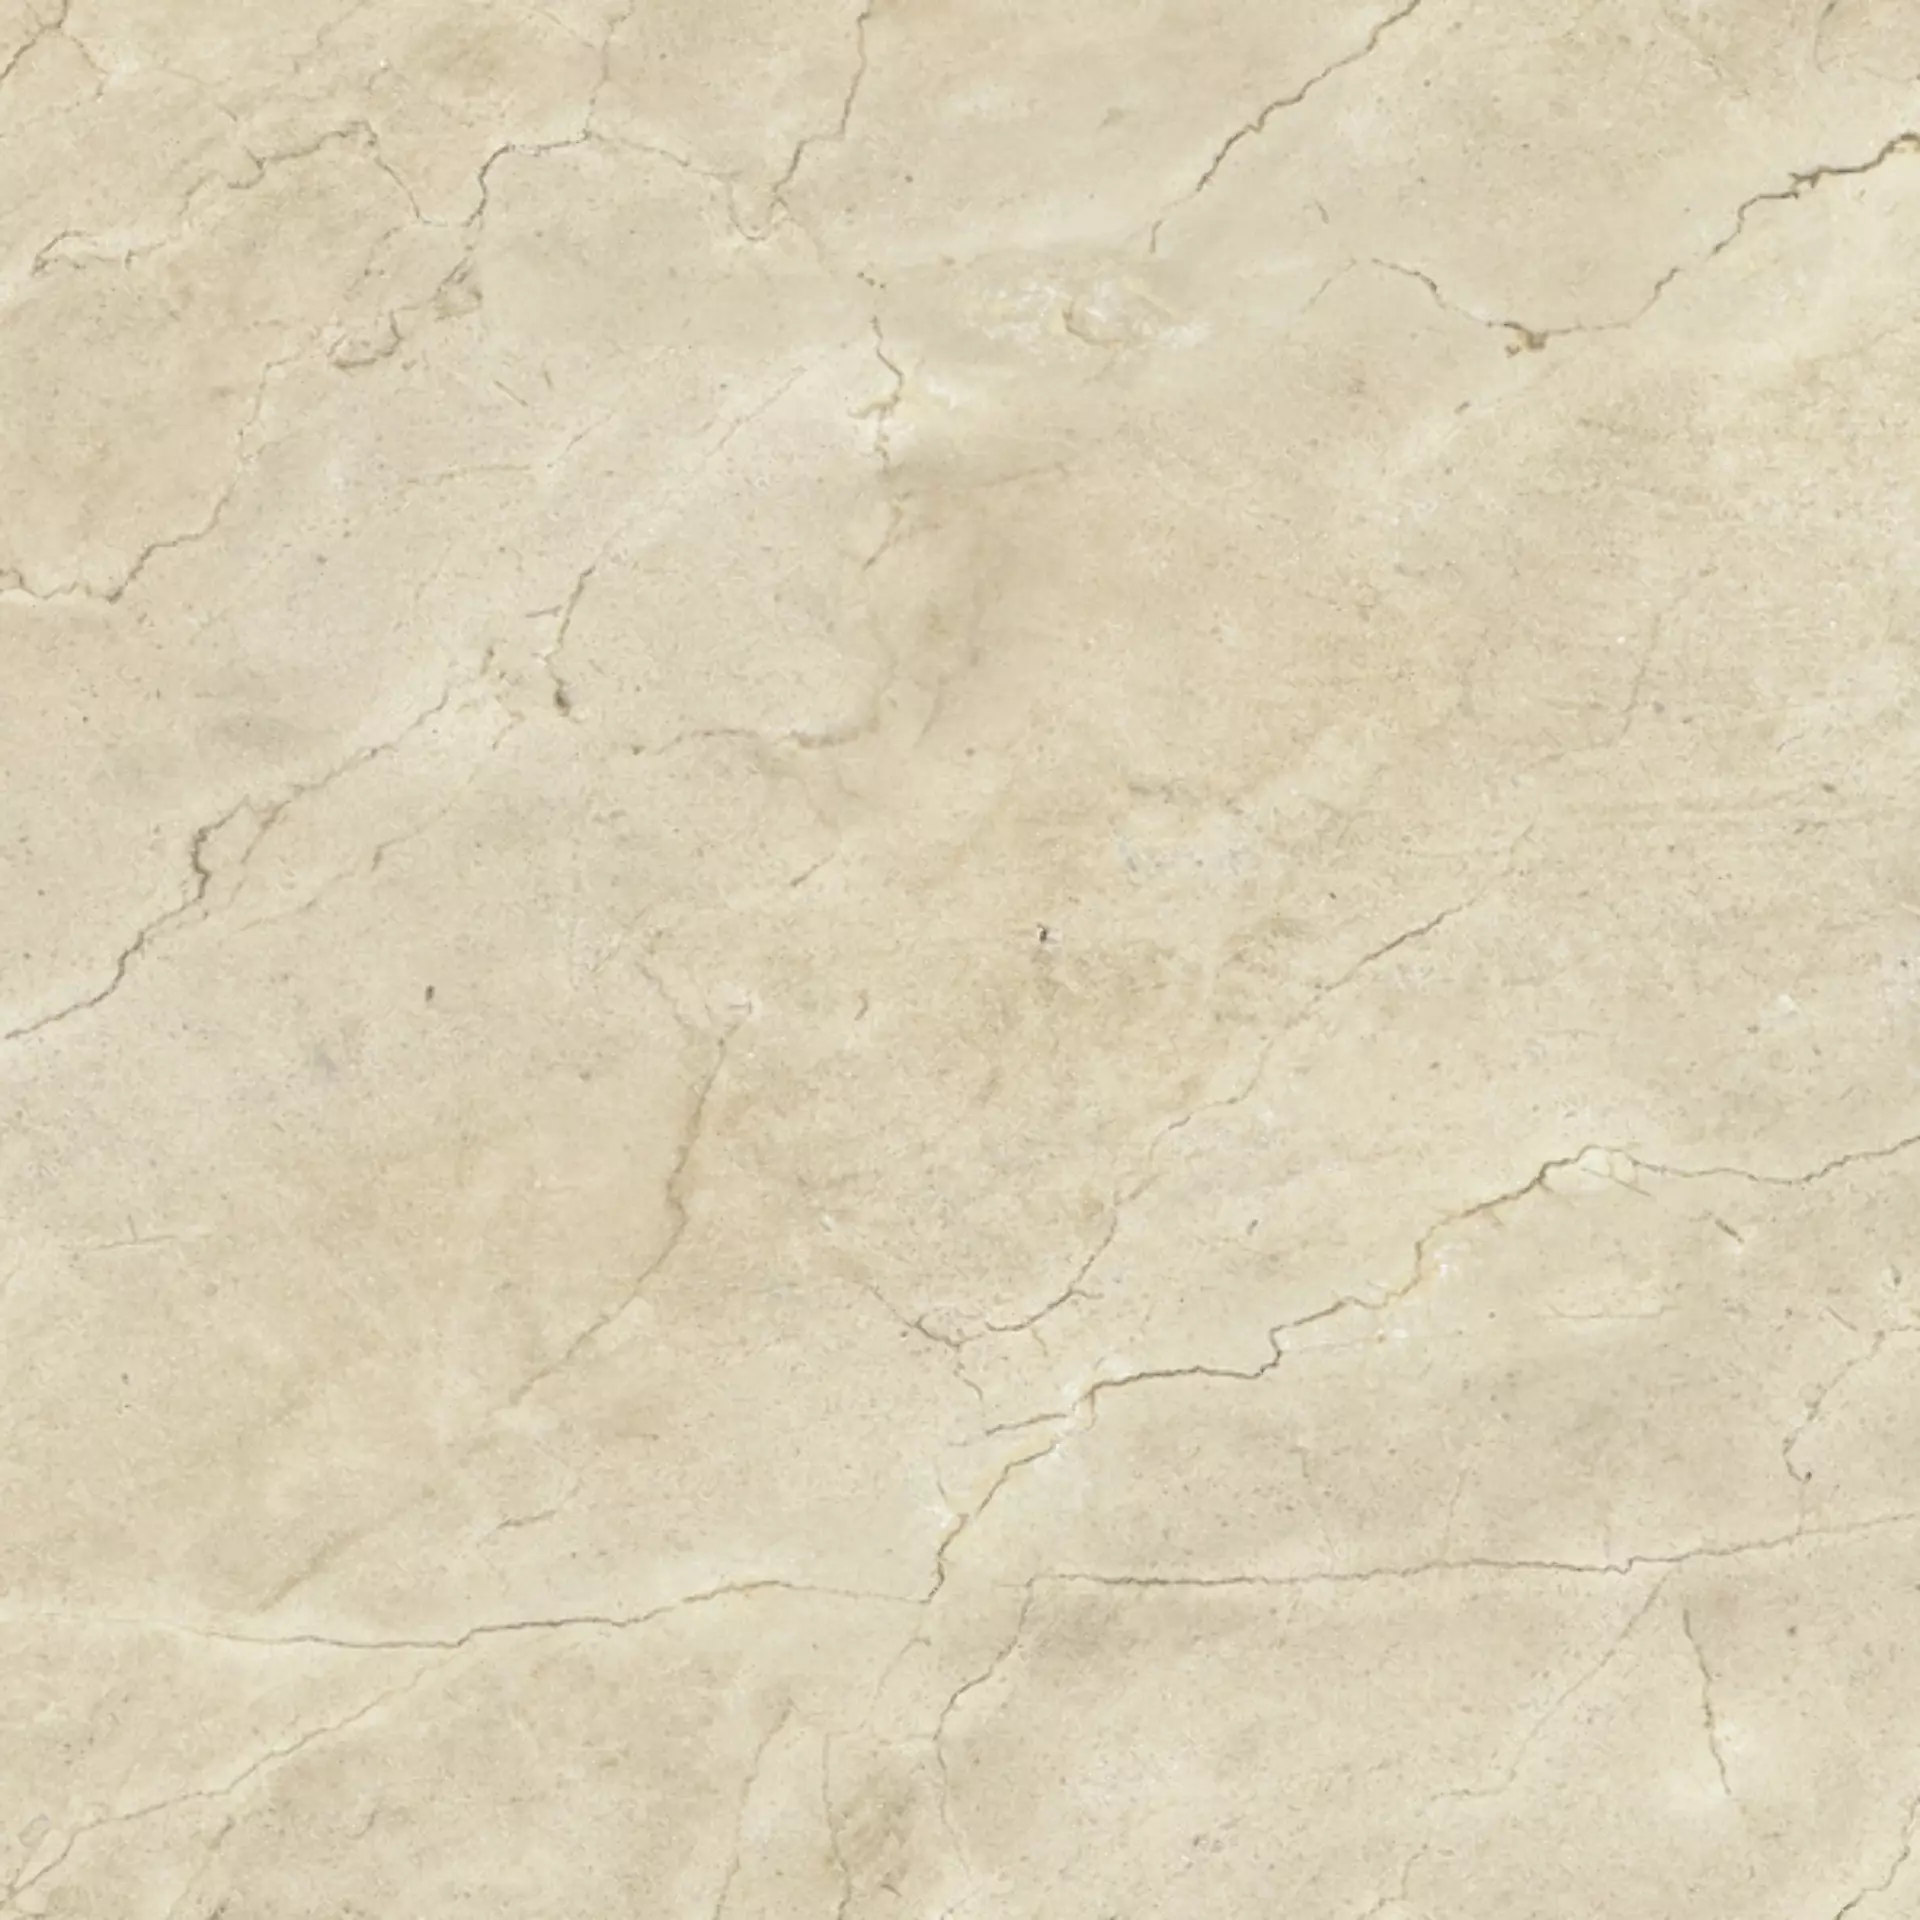 FMG Marmi Select Crema Marfil Extra Naturale P668392 60x60cm rectified 8mm